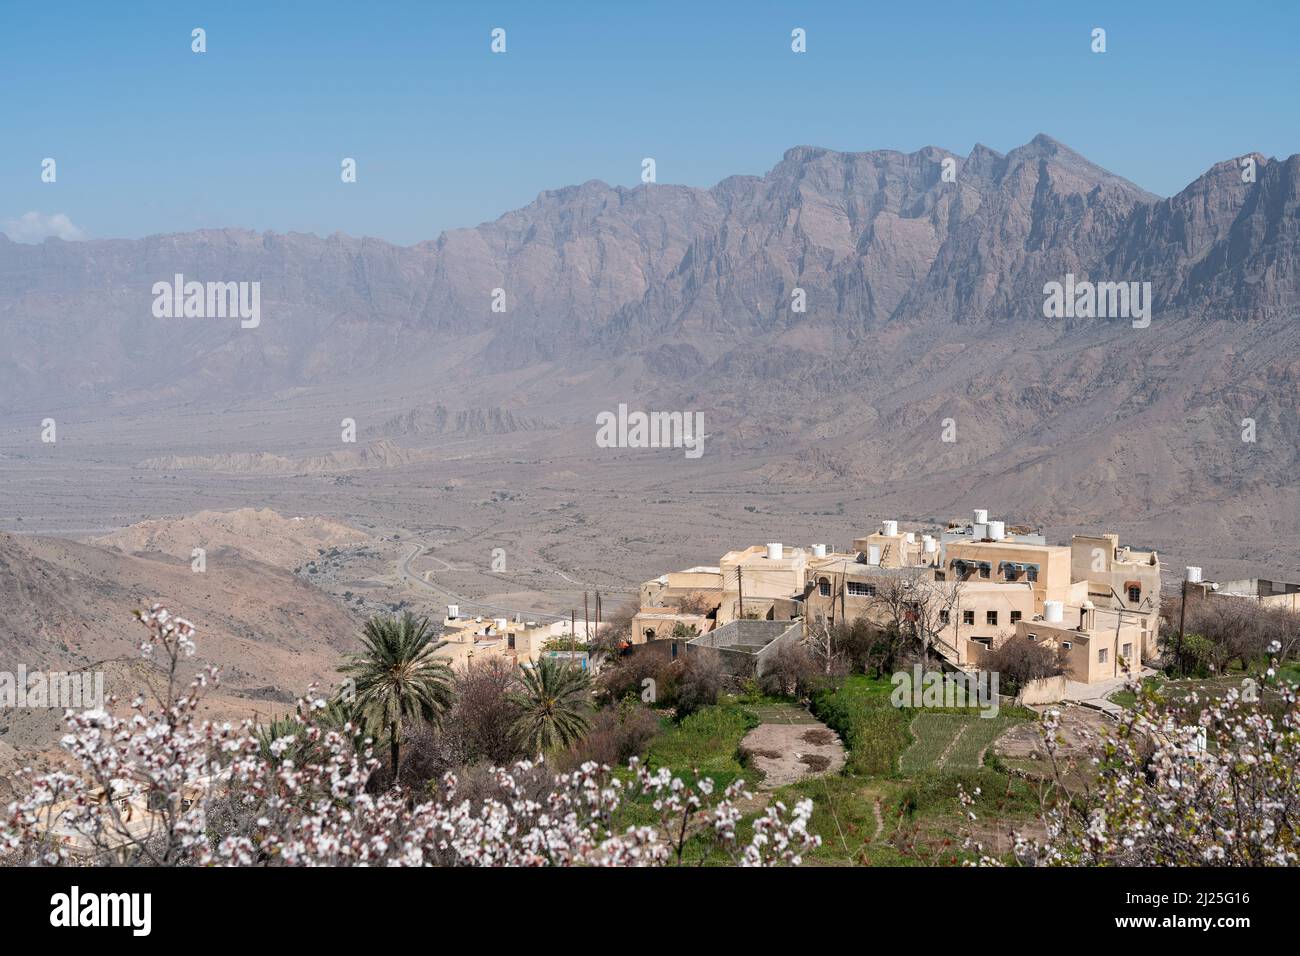 View of the traditional Omani village of Wakan, overlooking the Gubrah Bowl and Hajar Mountains, seen from a blossom and palm filled plantation above Stock Photo